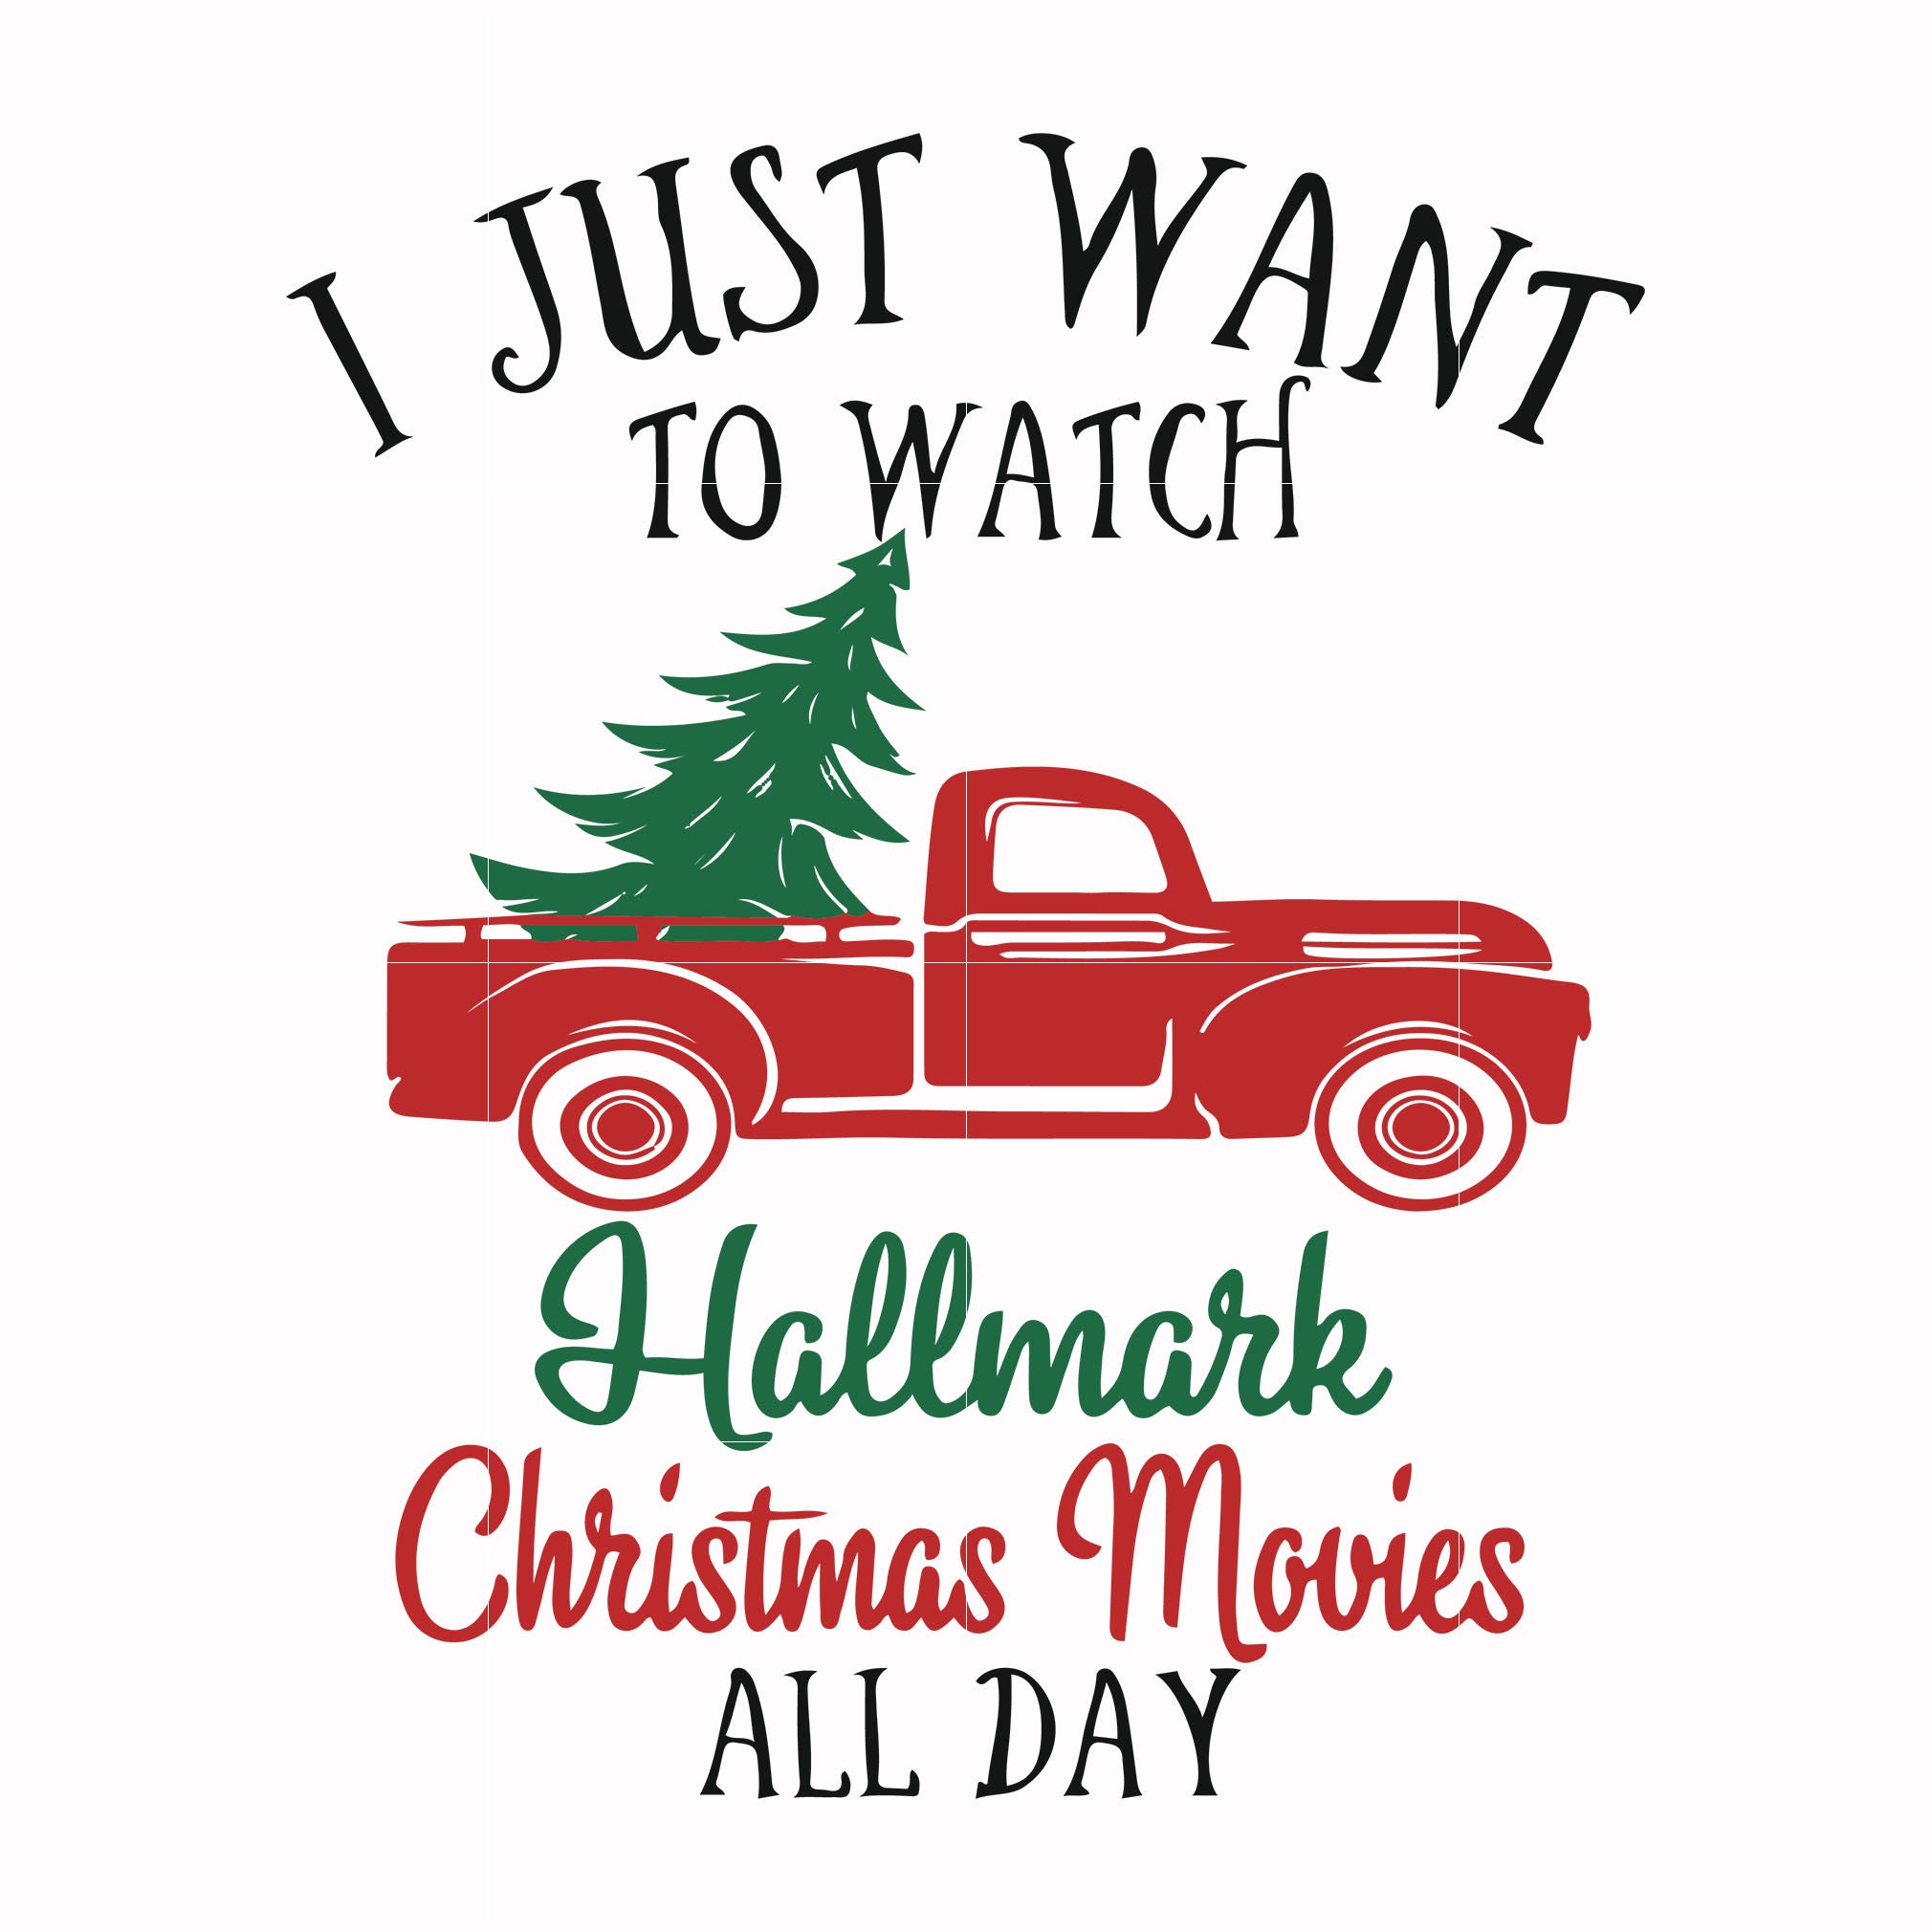 I Just Want To Watch Hallmark Christmas Movies All Day Svg Png Dxf Dreamsvg Store